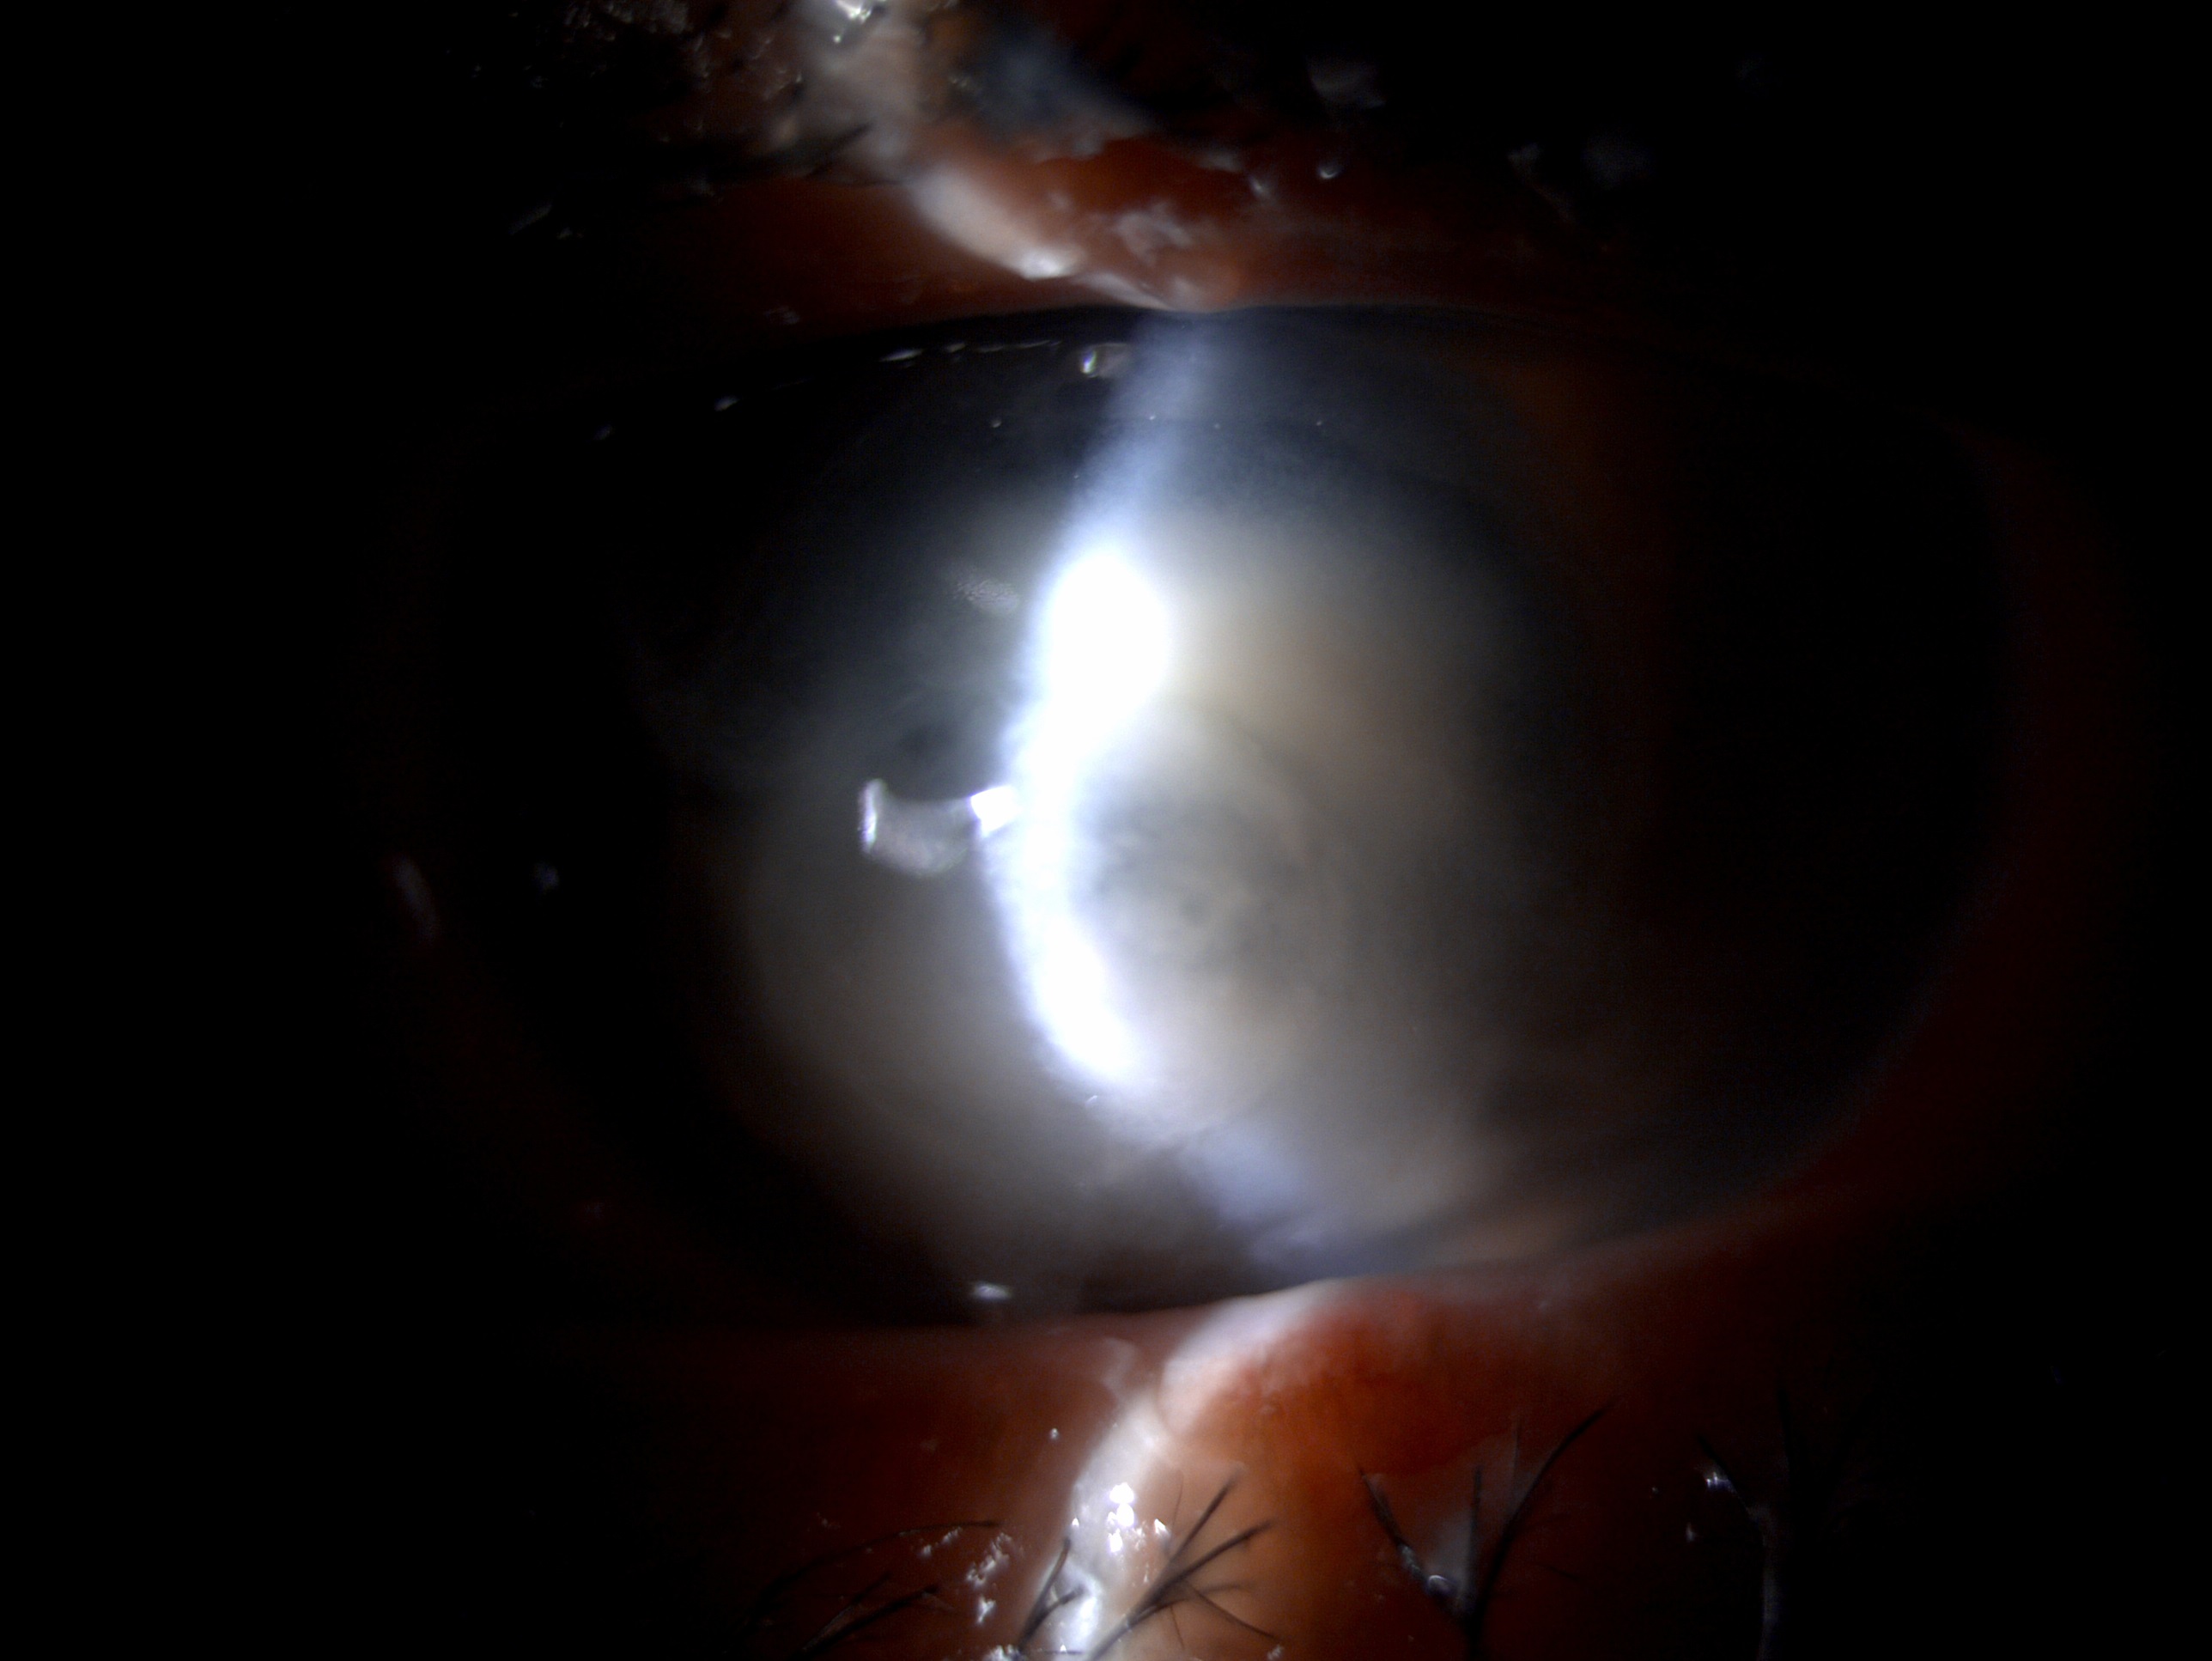 Slit lamp image of the patient depicting corneal melt, full thickness corneal infiltrate in a patient with pseudomonas endogenous endophthalmitis 